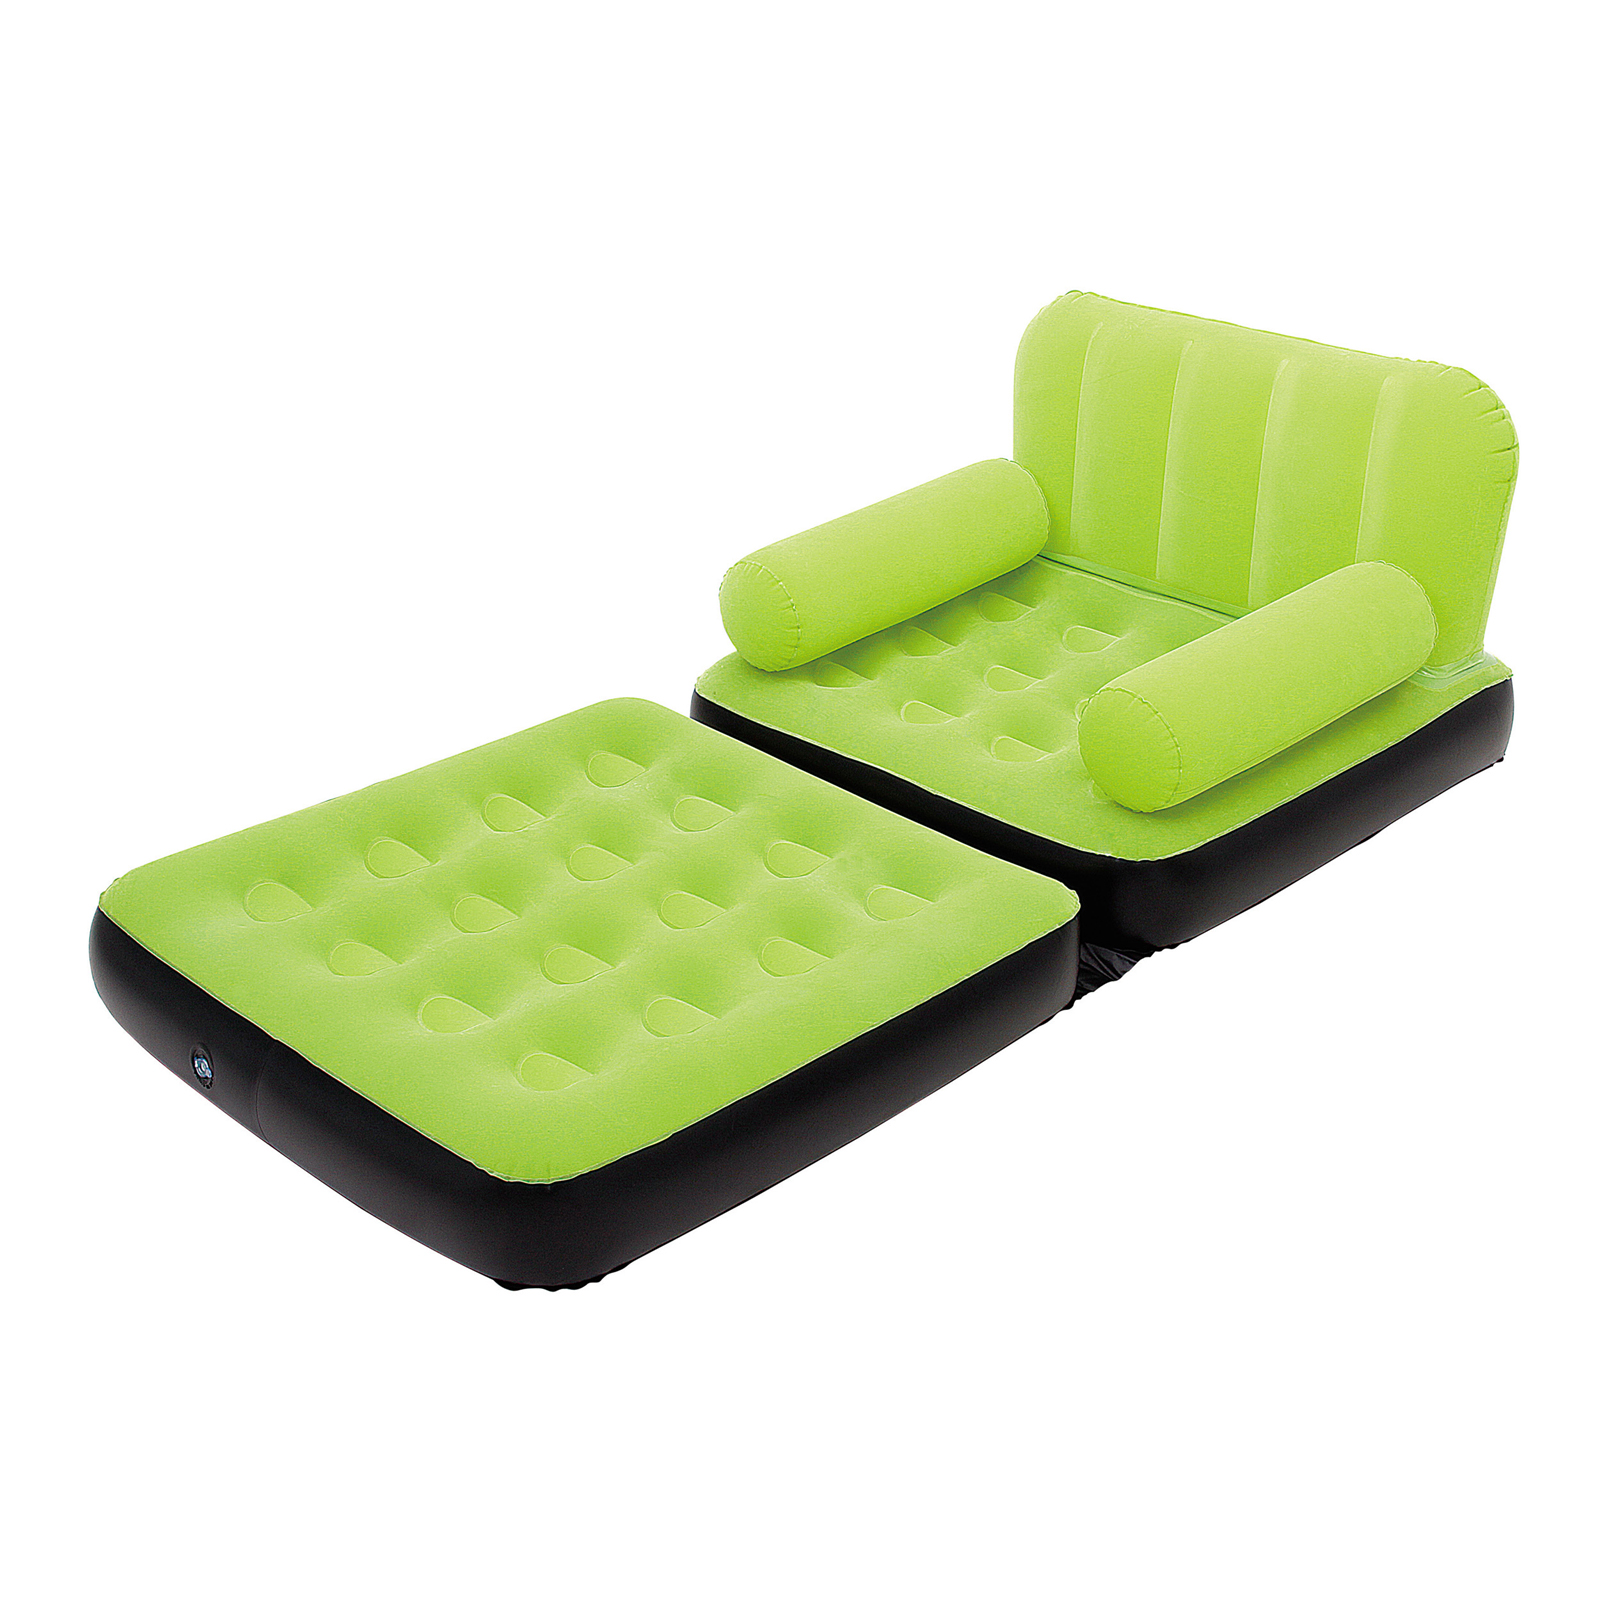 UPC 821808100231 product image for Bestway MultiMax 2-in-1 Chair - Green | upcitemdb.com